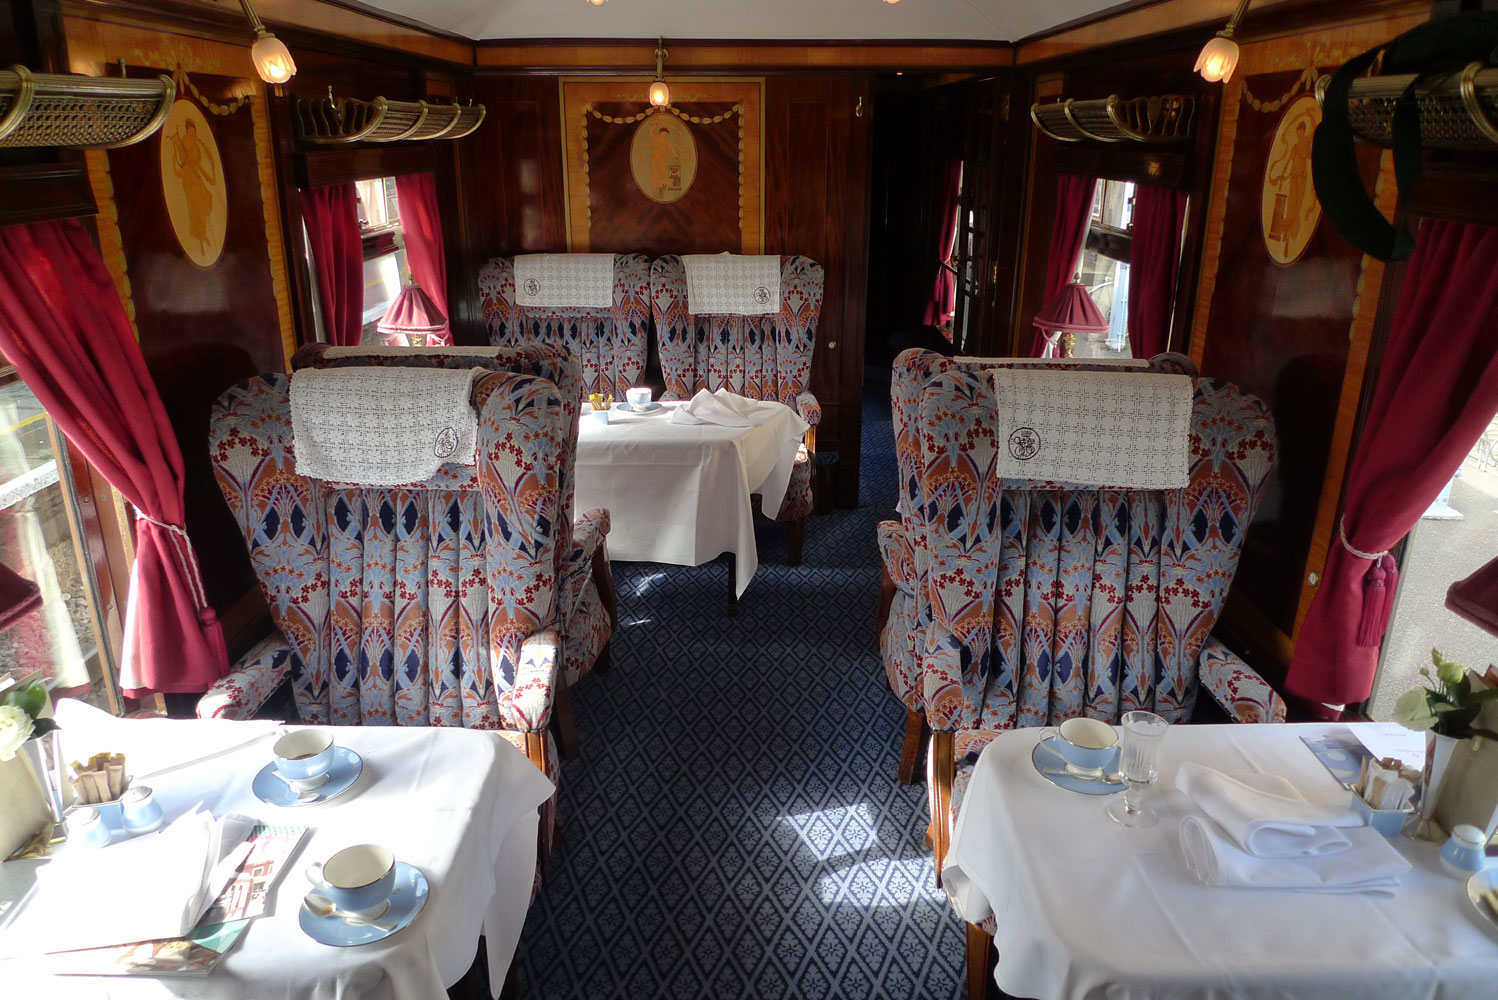 A-BROAD ONBOARD THE ORIENT EXPRESS — A-Broad In London